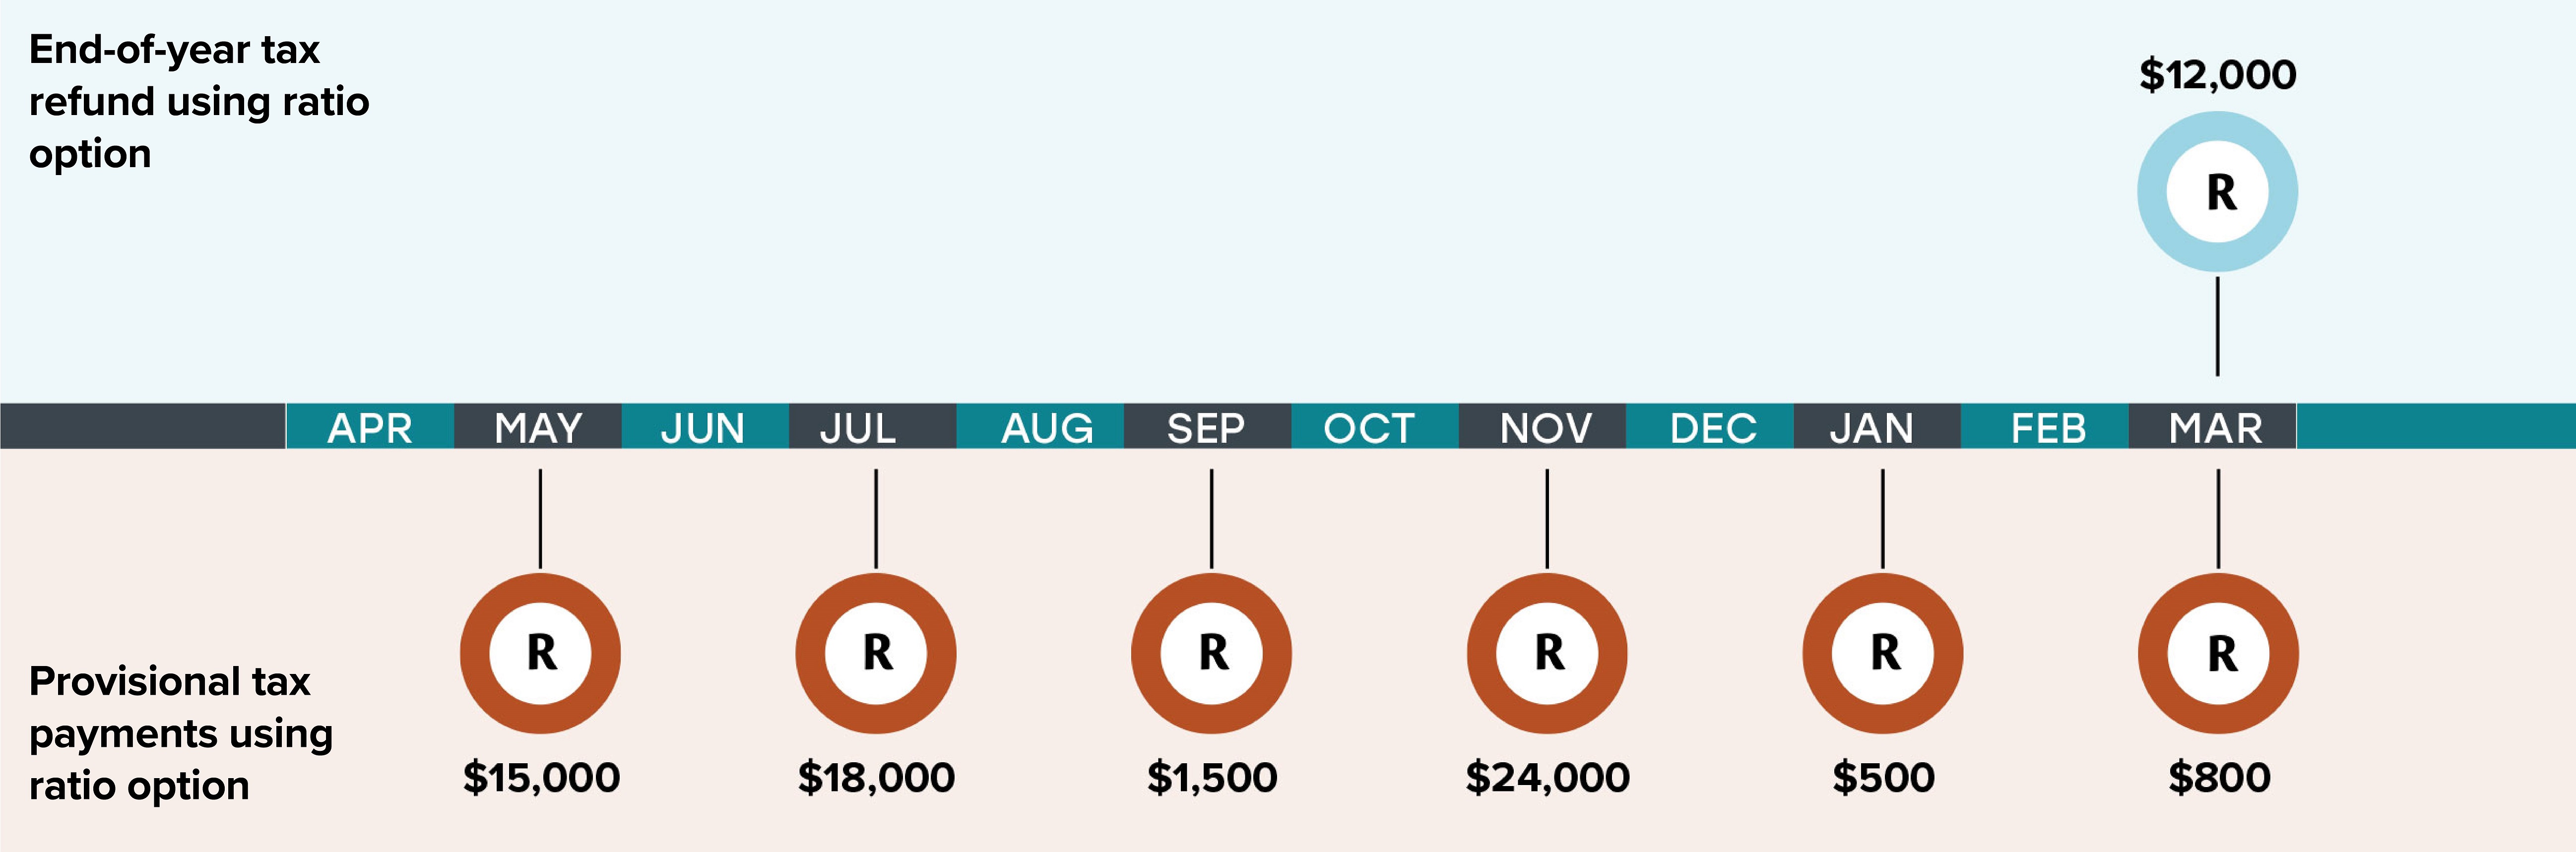 April to March timeline of provisional tax when using the ratio method. 6 different provisional tax payments were made during the year as they are based on business turnover. 15,000 paid in May, 18,000 paid in July, 1,500 paid in September, 24,000 paid in November, 500 paid in January, and 800 paid in March. In March an end-of-year tax refund of 12,000 was issued.